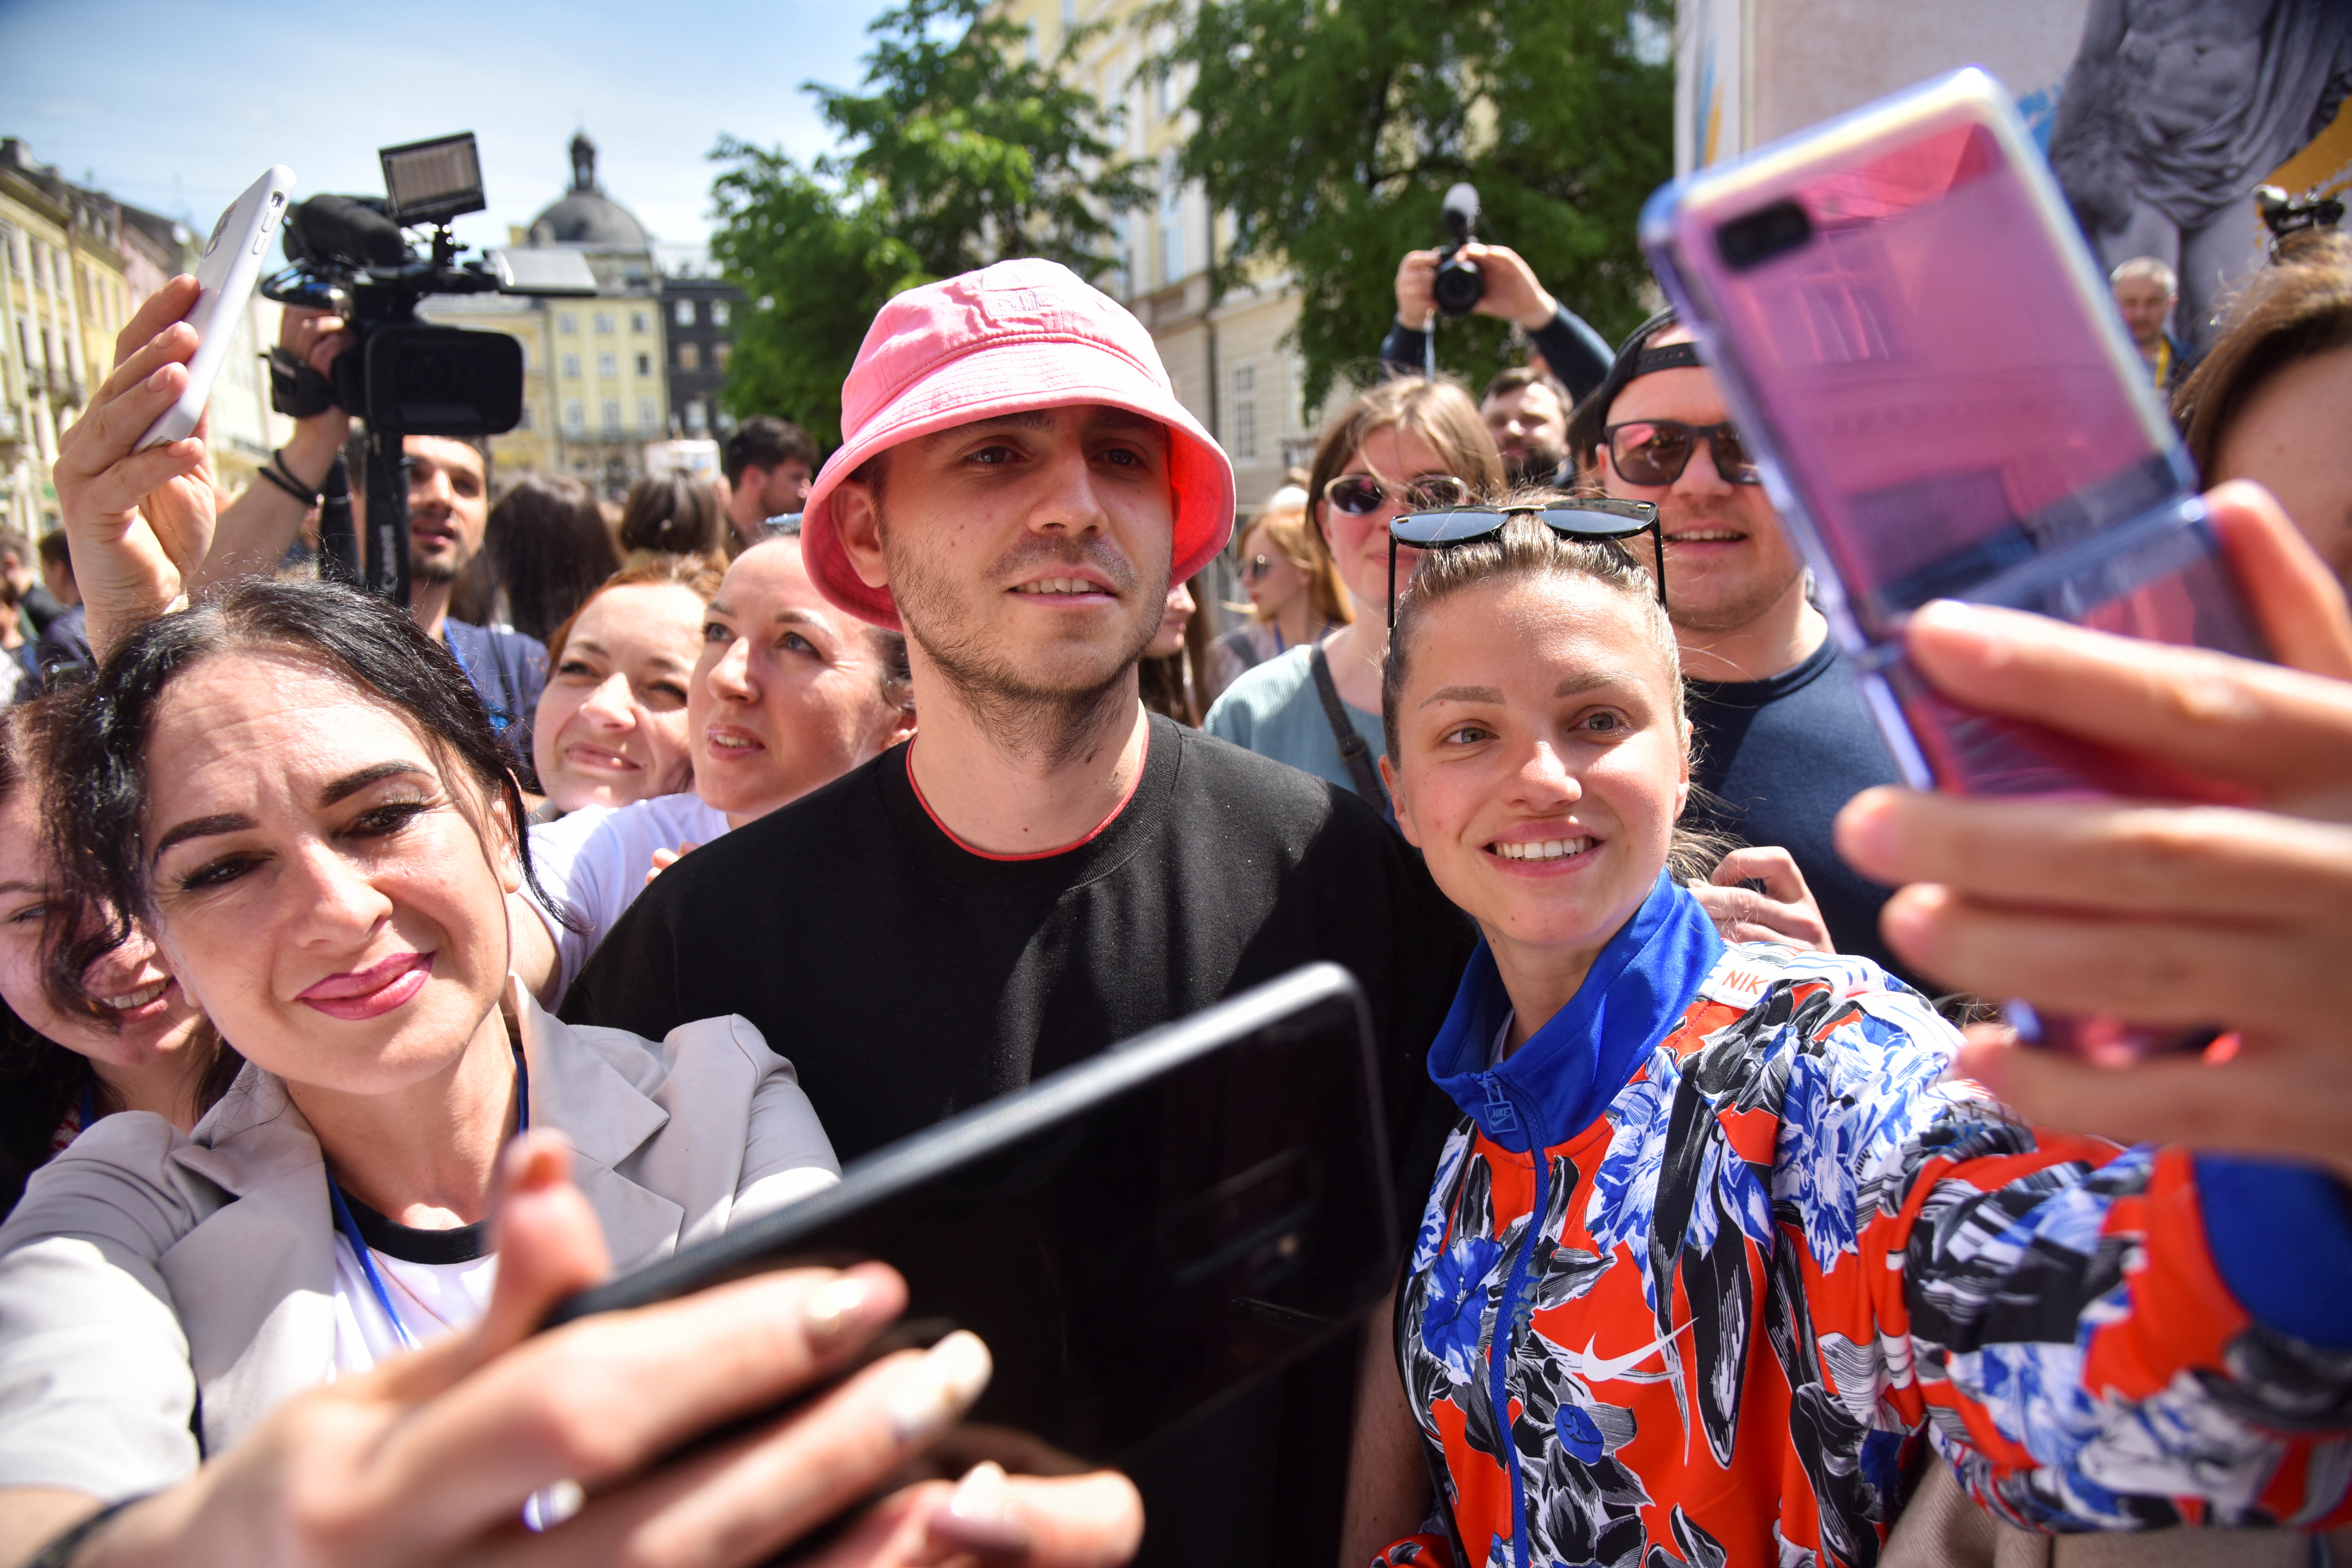 2022 Eurovision Song Contest winners Kalush Orchestra meet with fans in Lviv